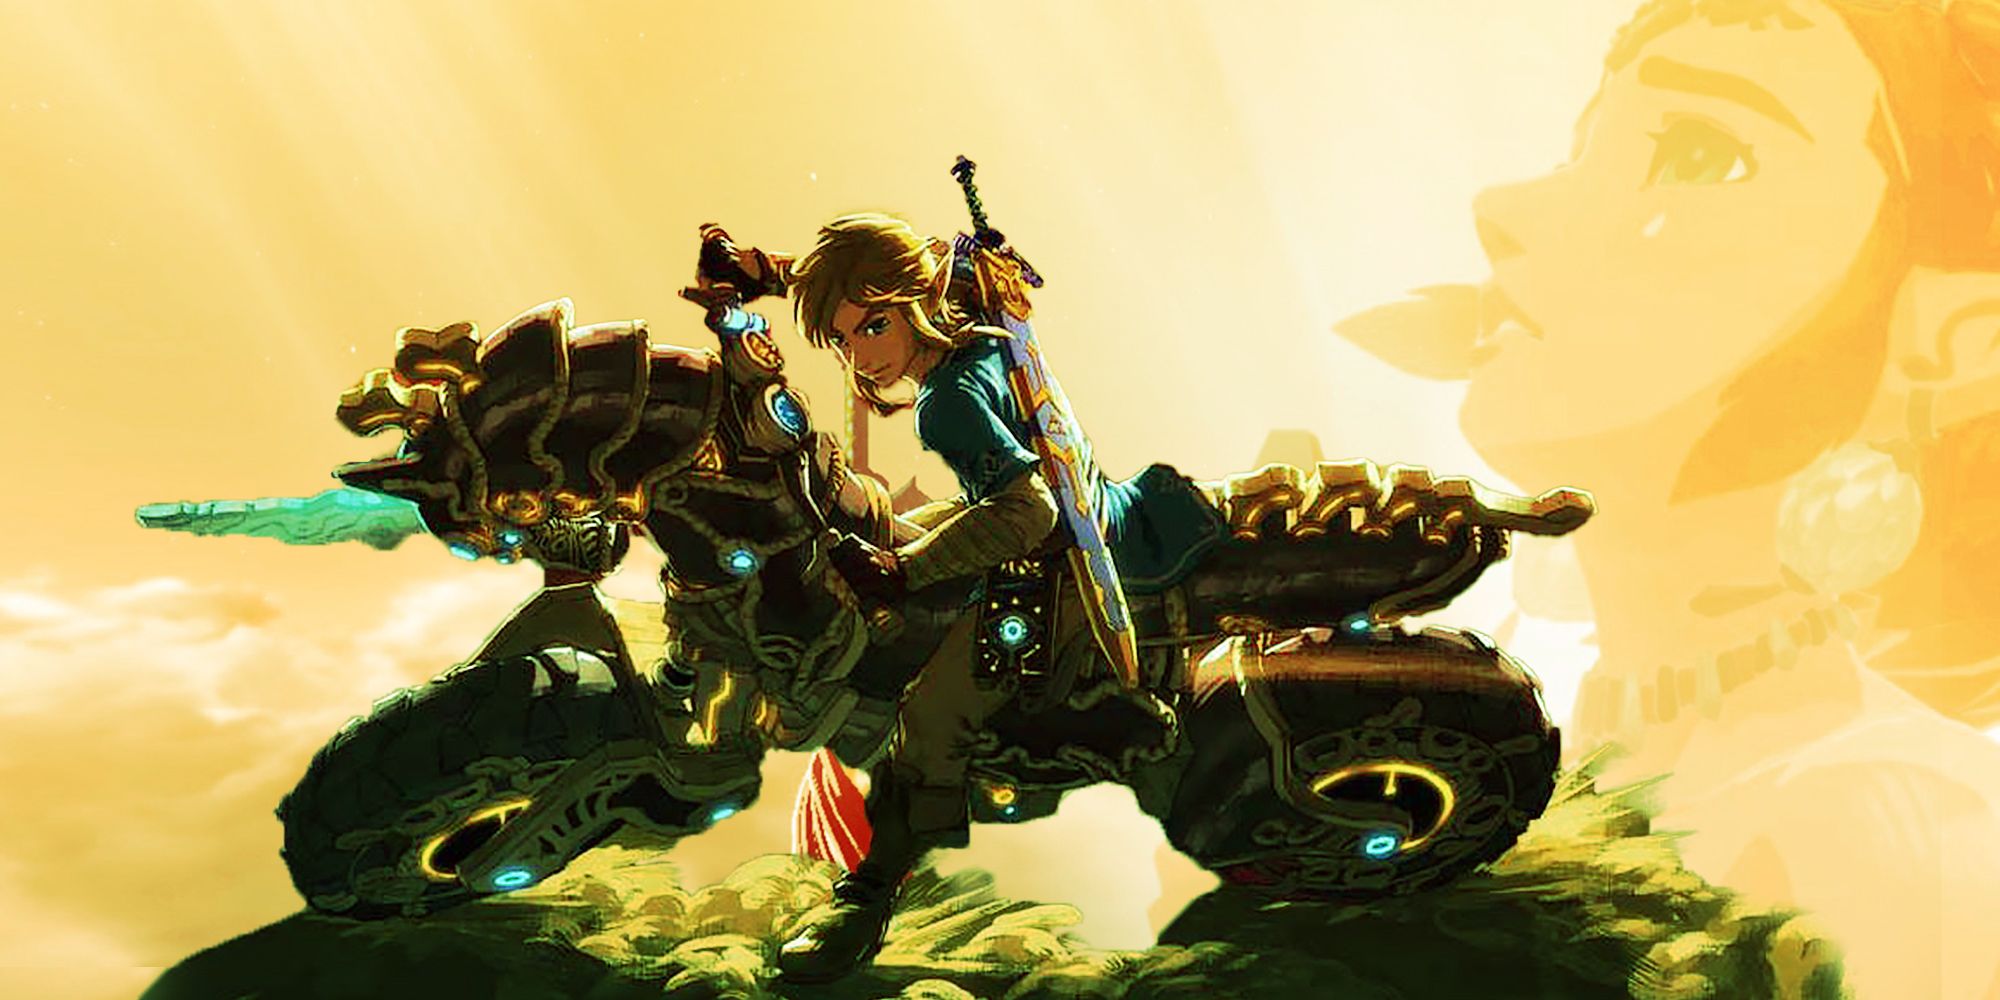 Link riding the Master Cycle Zero motorcycle in Breath of the Wild, with a shot of Tears of the Kingdom's version of Zelda fading into the sky behing him.